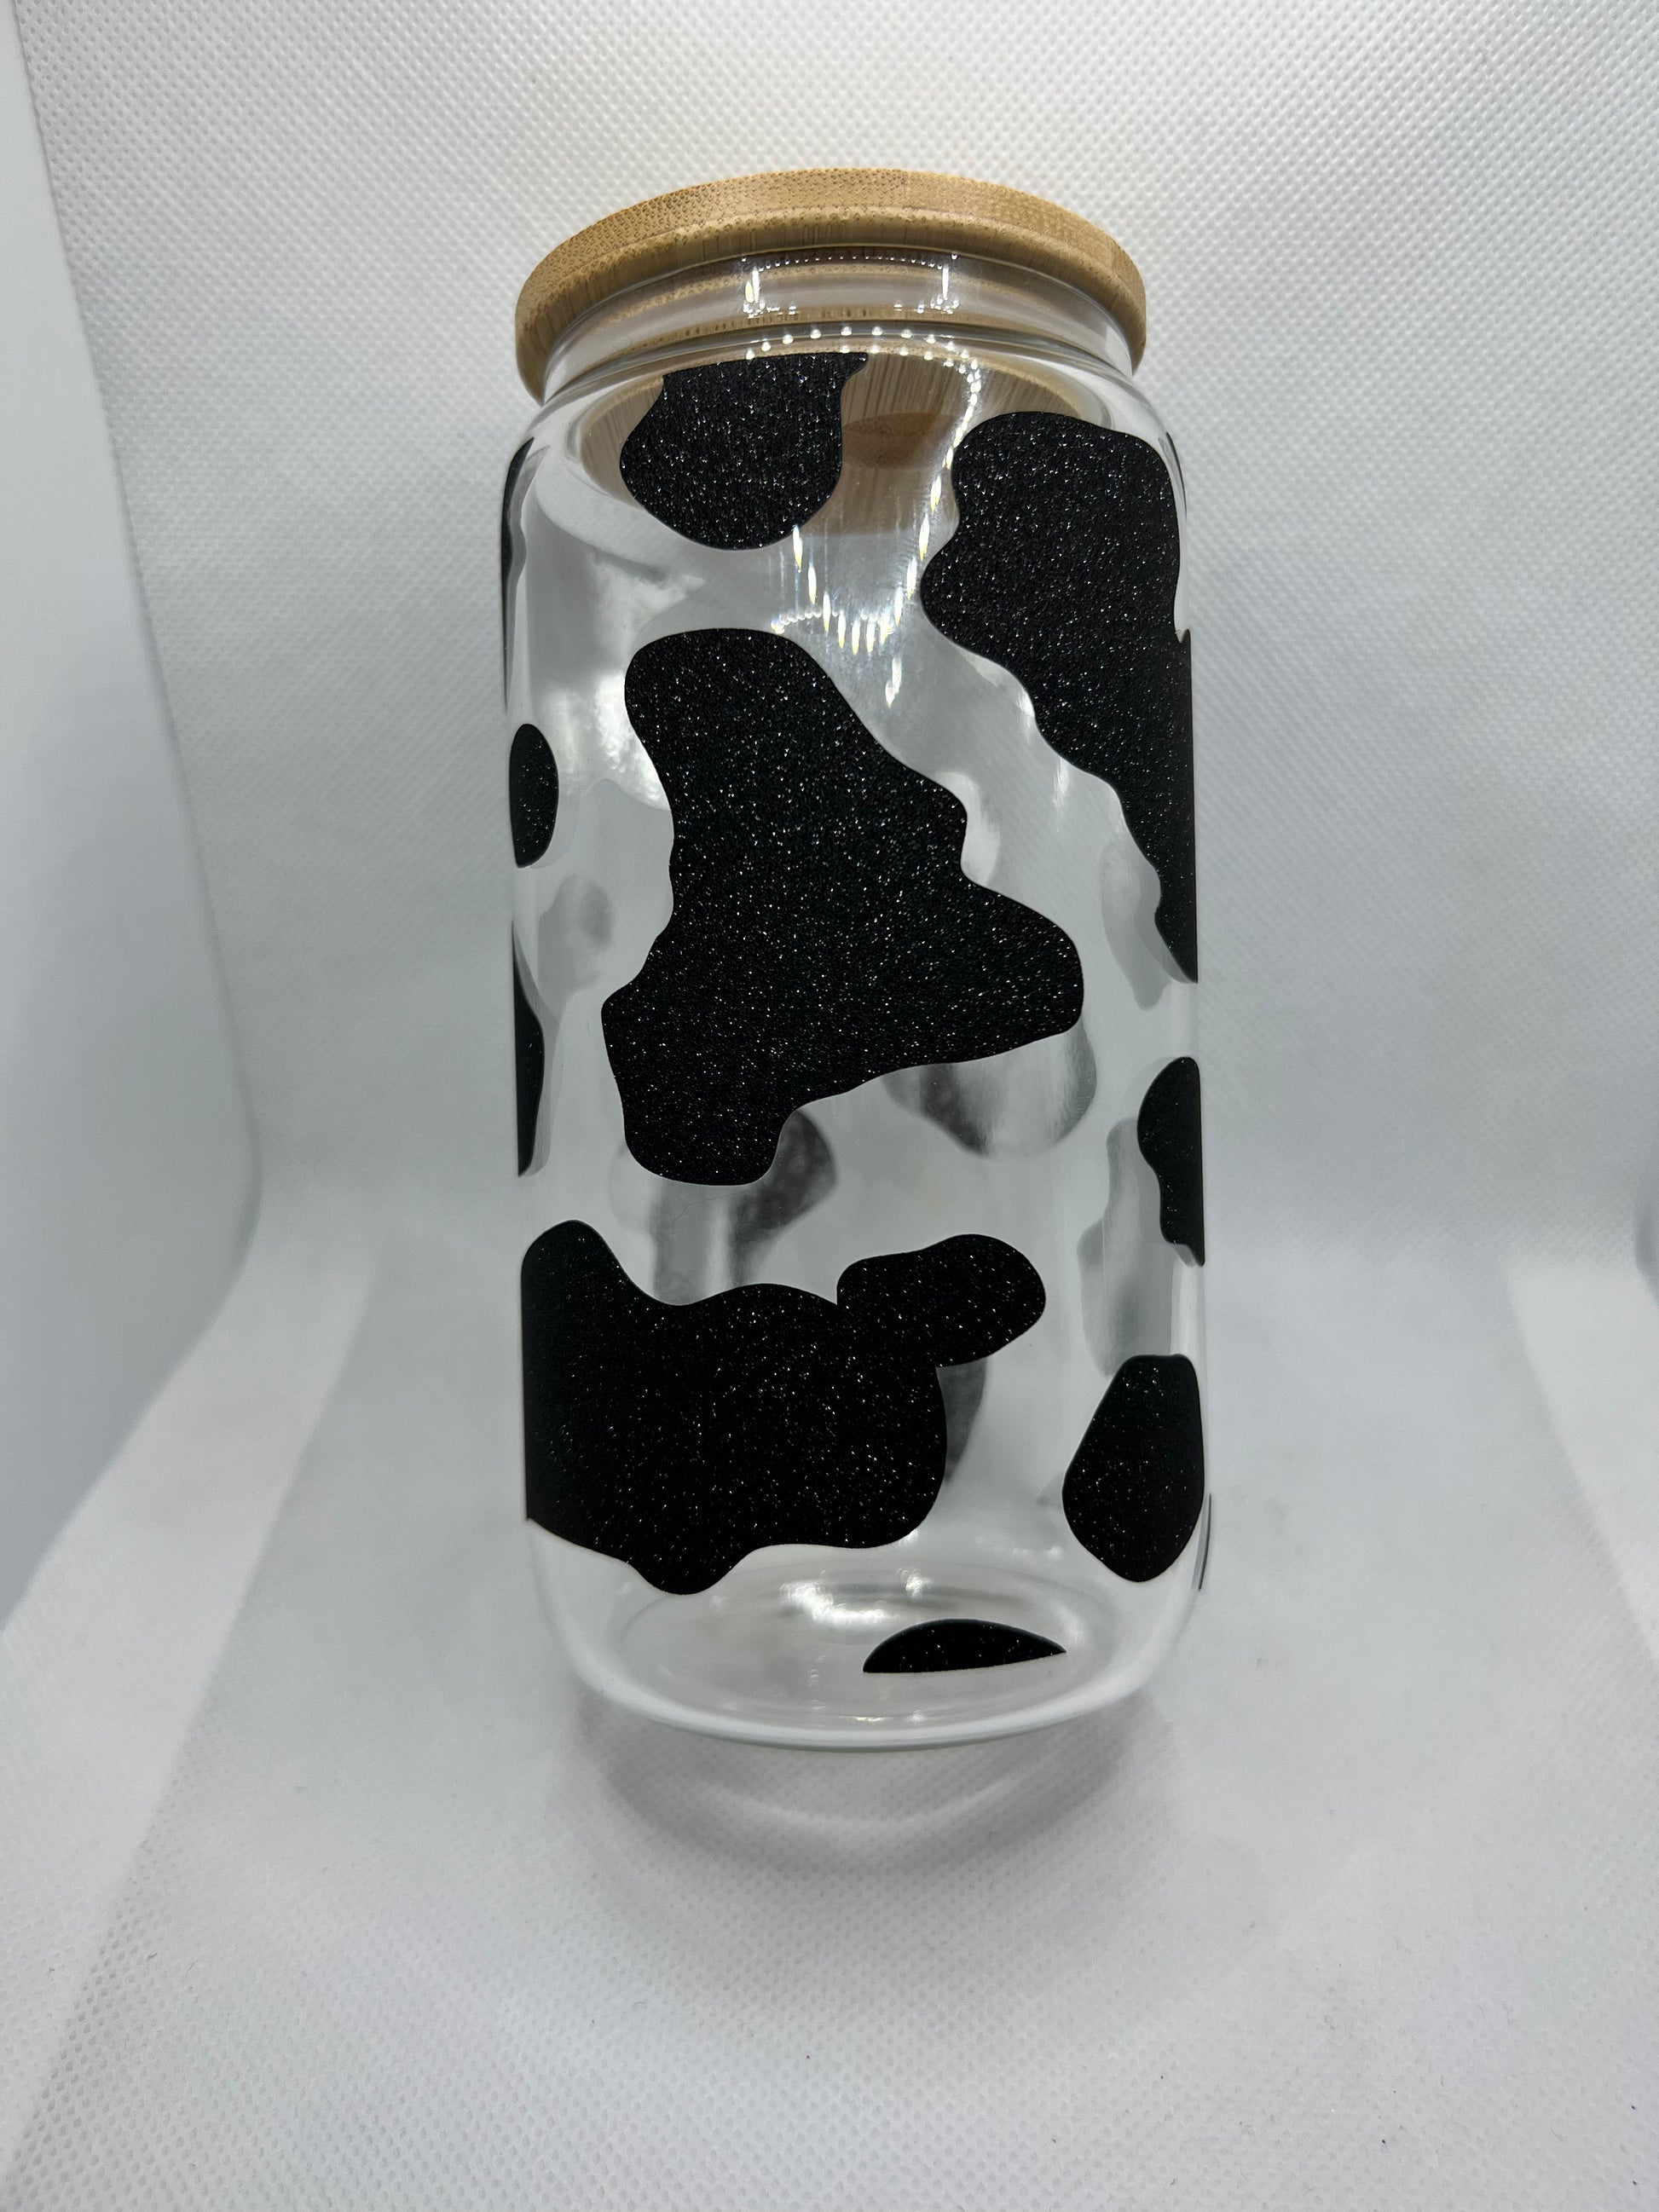 Glass Tumbler with Bamboo Straw & Lid | Iced Coffee Cup | Glitter Cow Print  Glass Tumbler | Mason Jar | 24oz Resuable Cup | Boba Cup